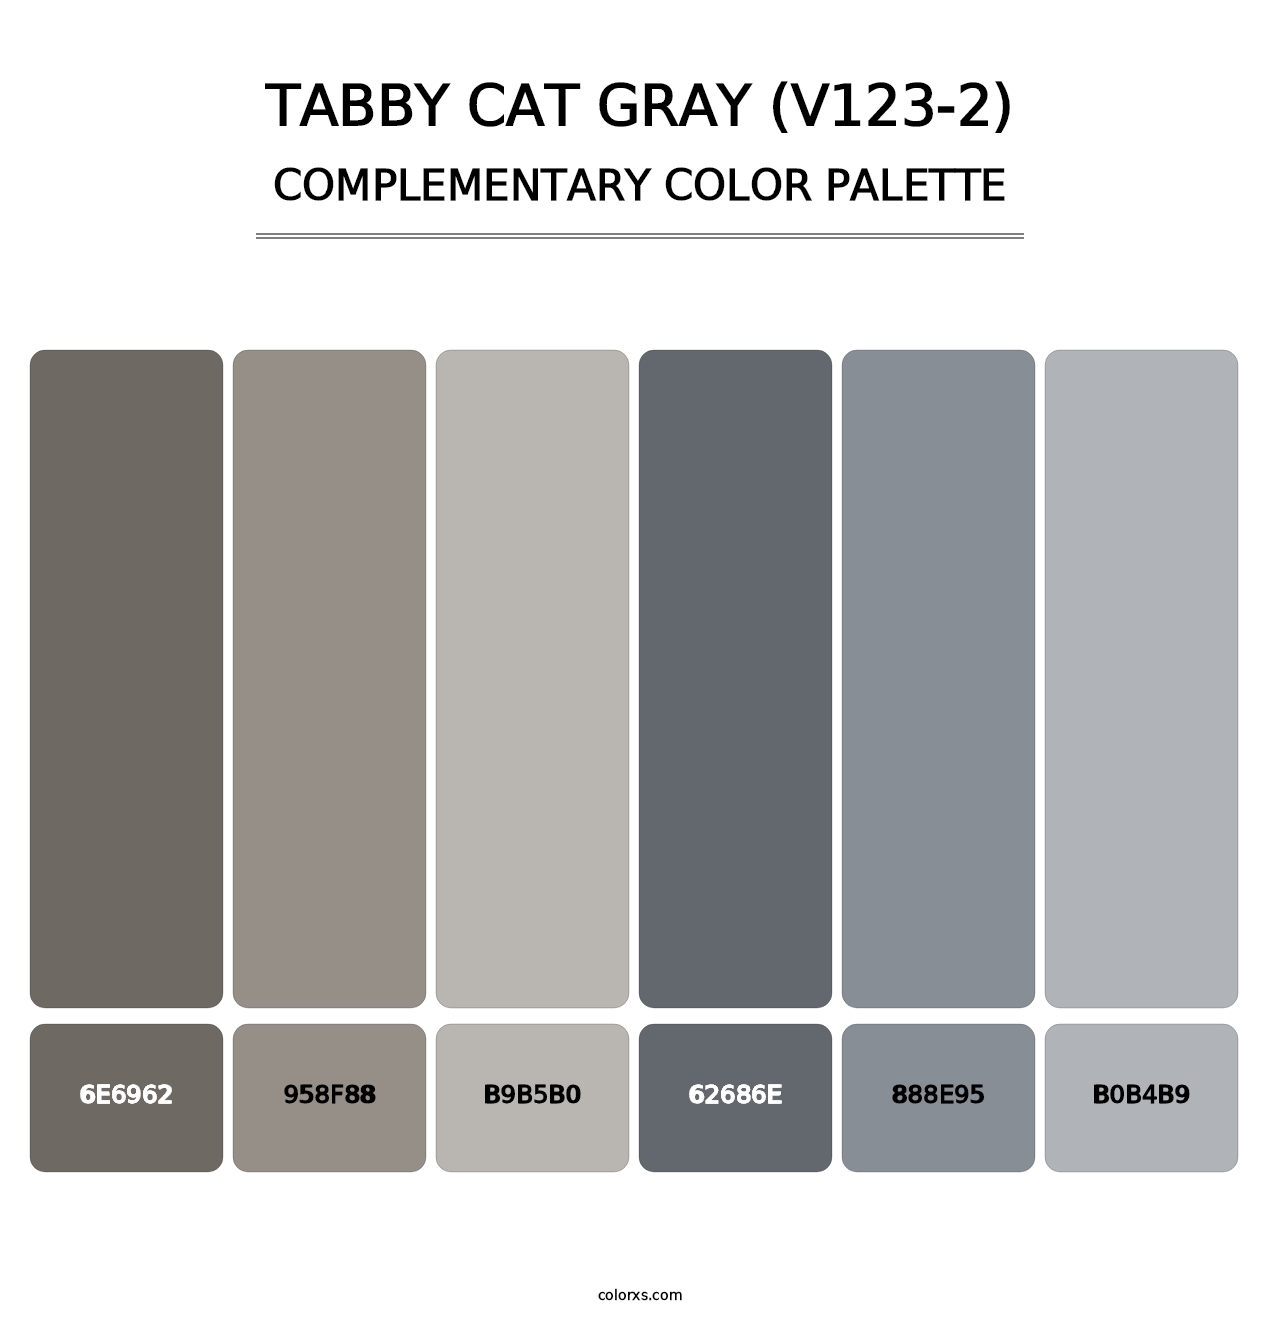 Tabby Cat Gray (V123-2) - Complementary Color Palette